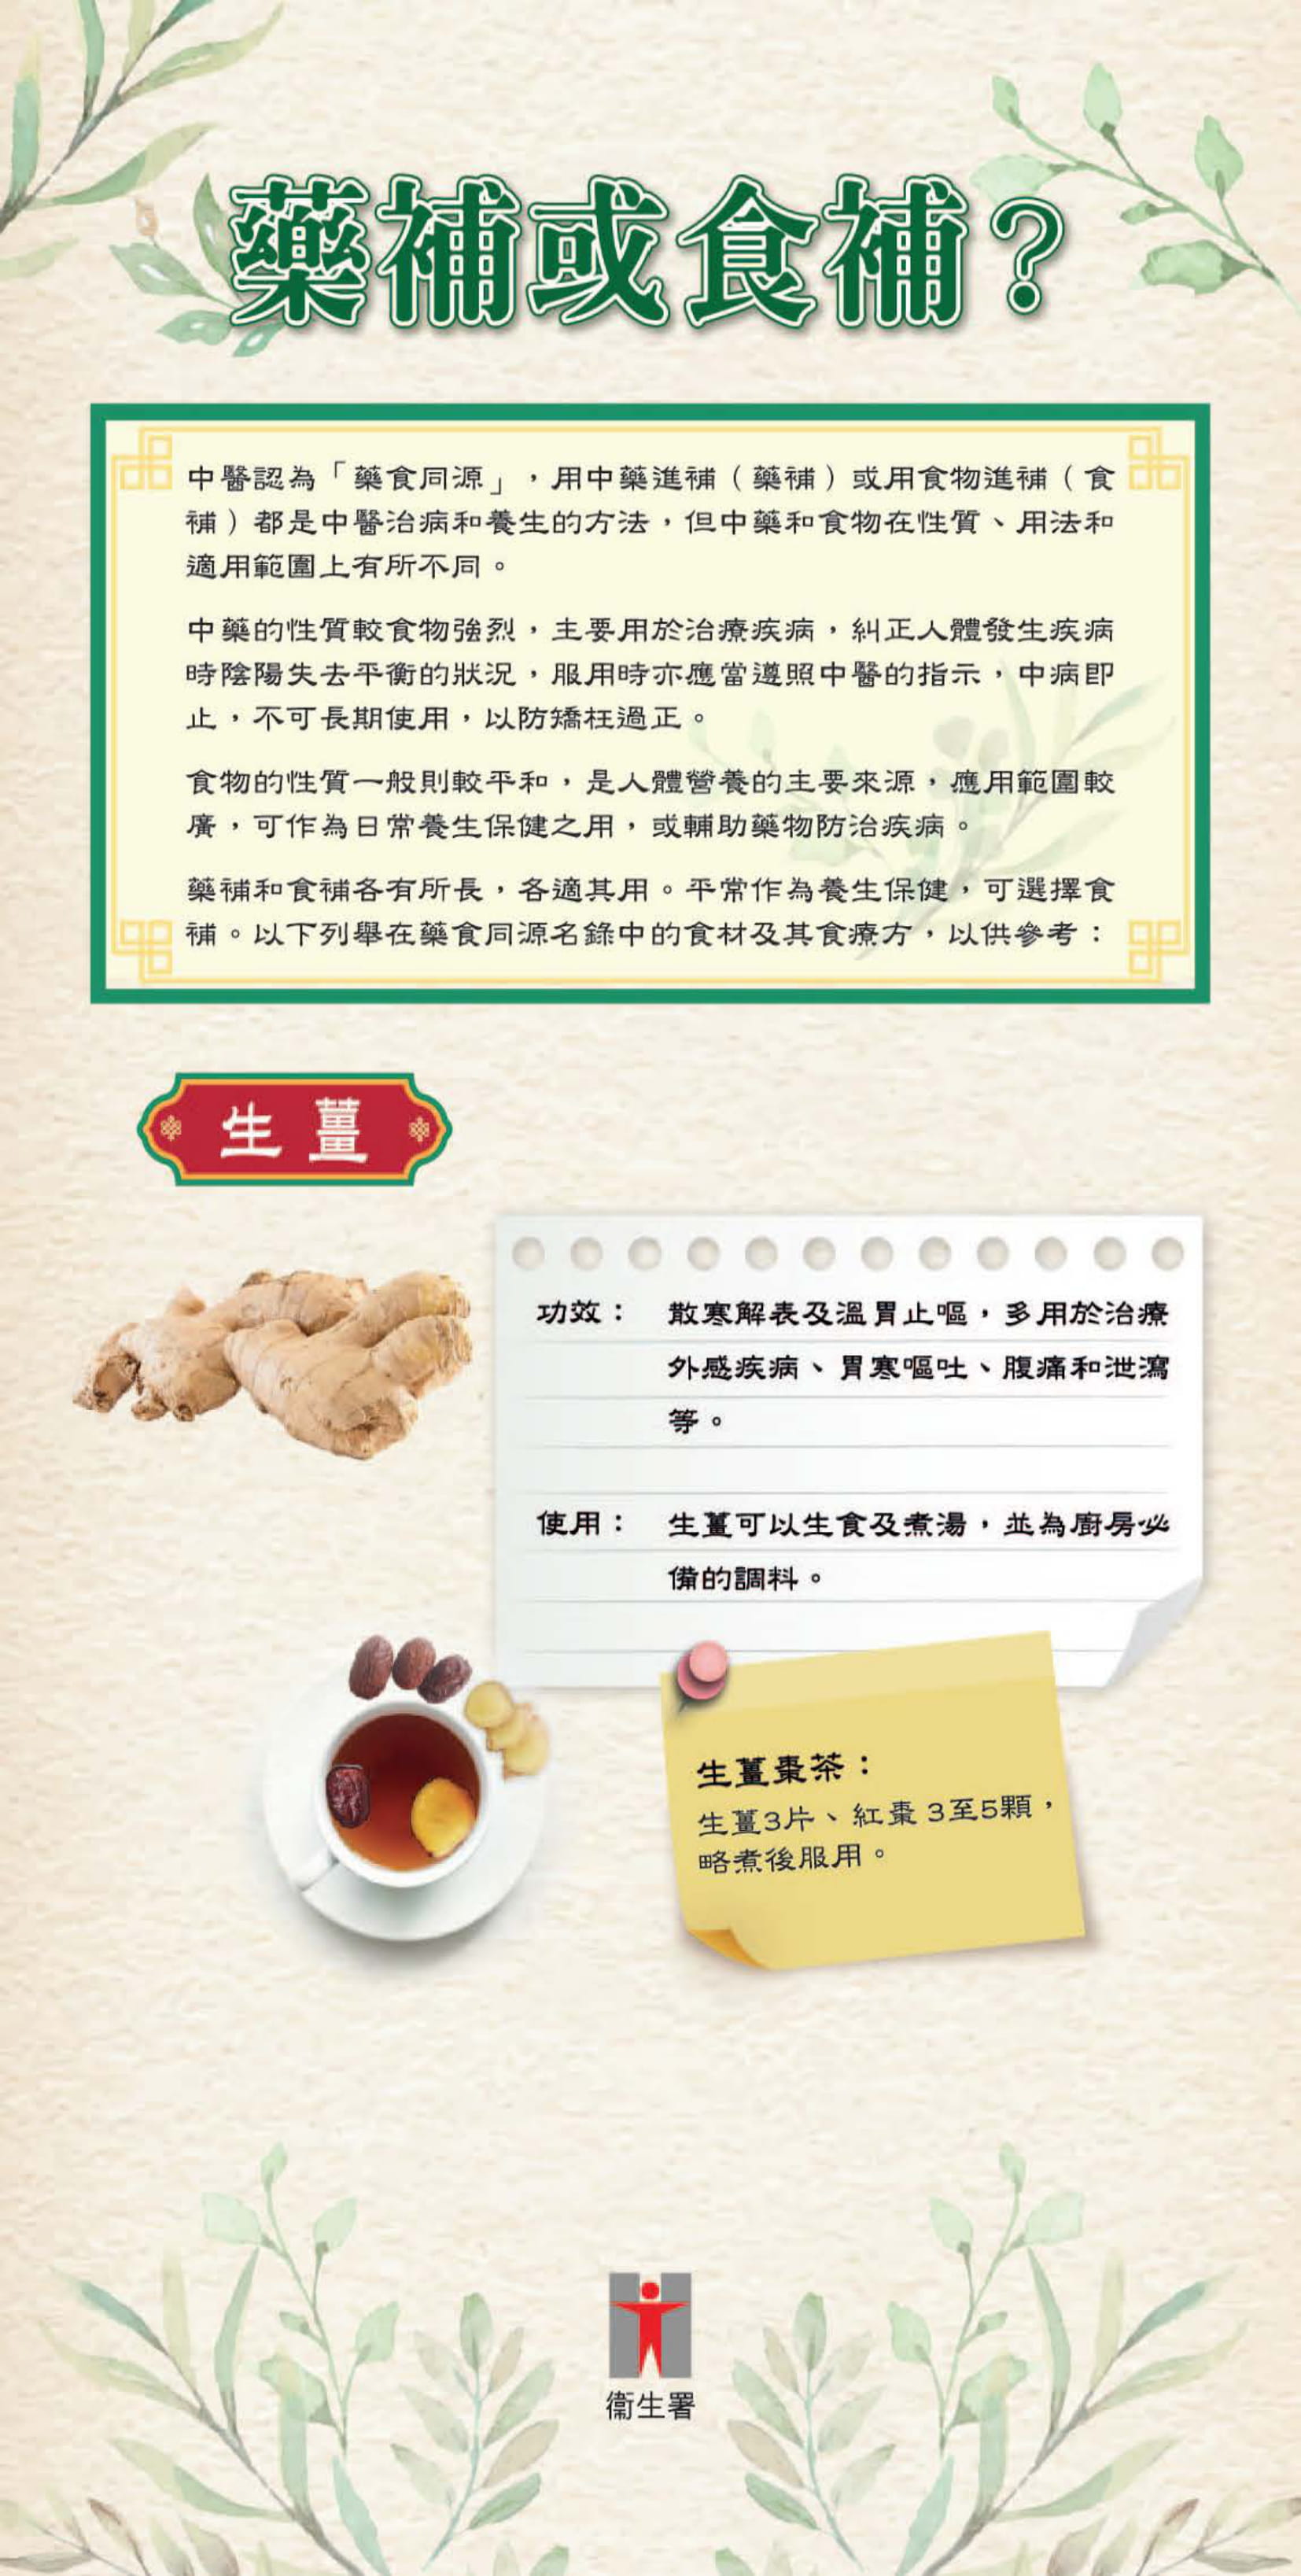 Herbal Tonics or Food Tonics? (Chinese version only)